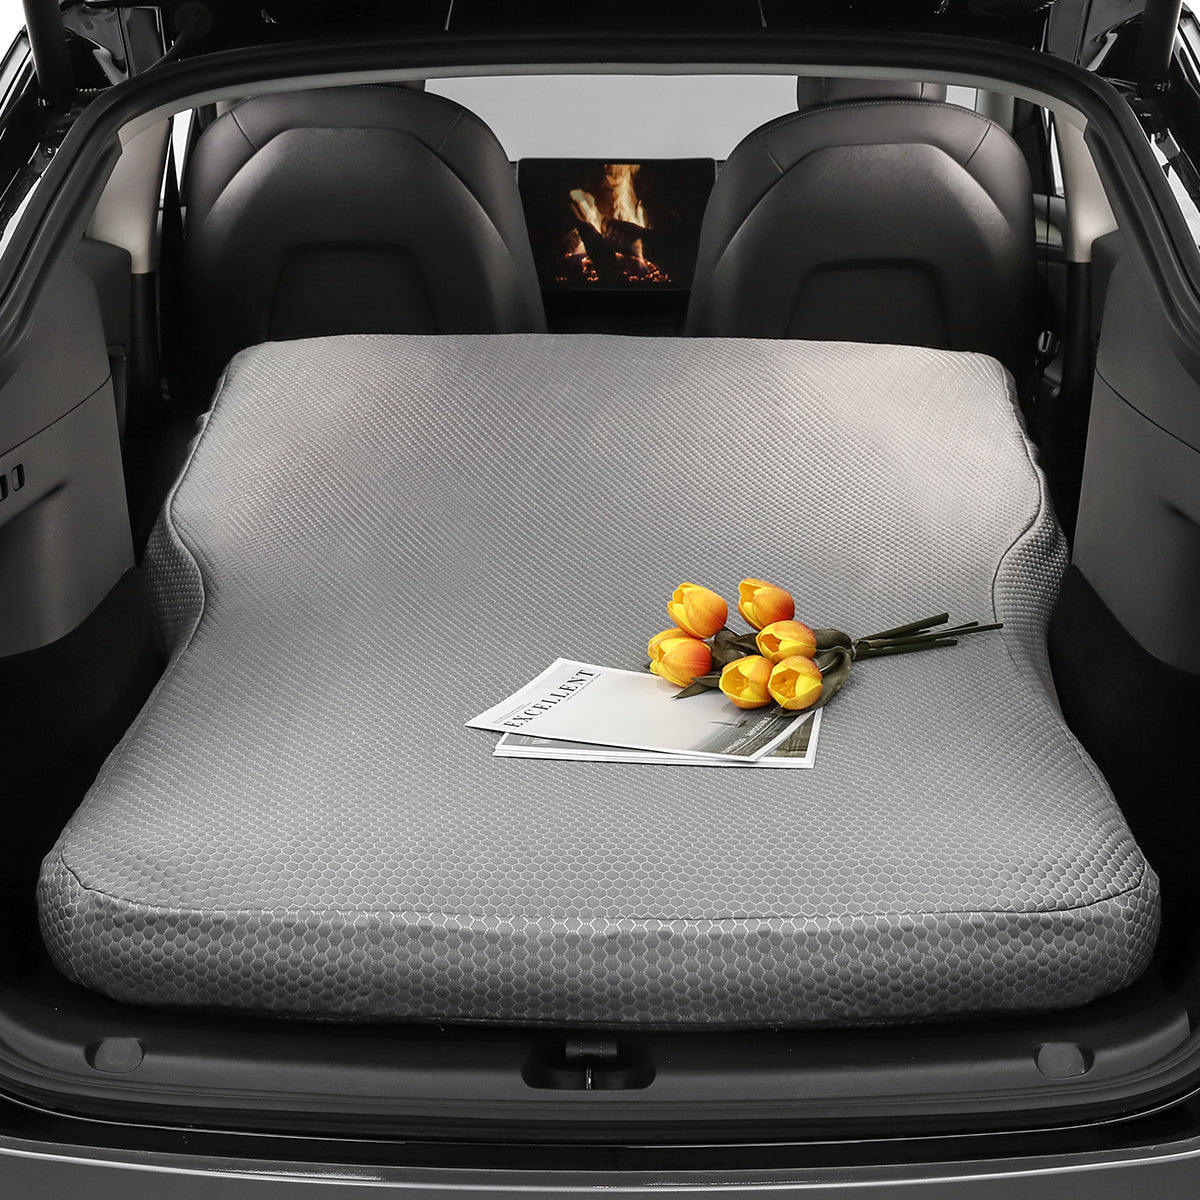 TPARTS Camping Mattress Air Bed for Tesla Model Y – Tparts